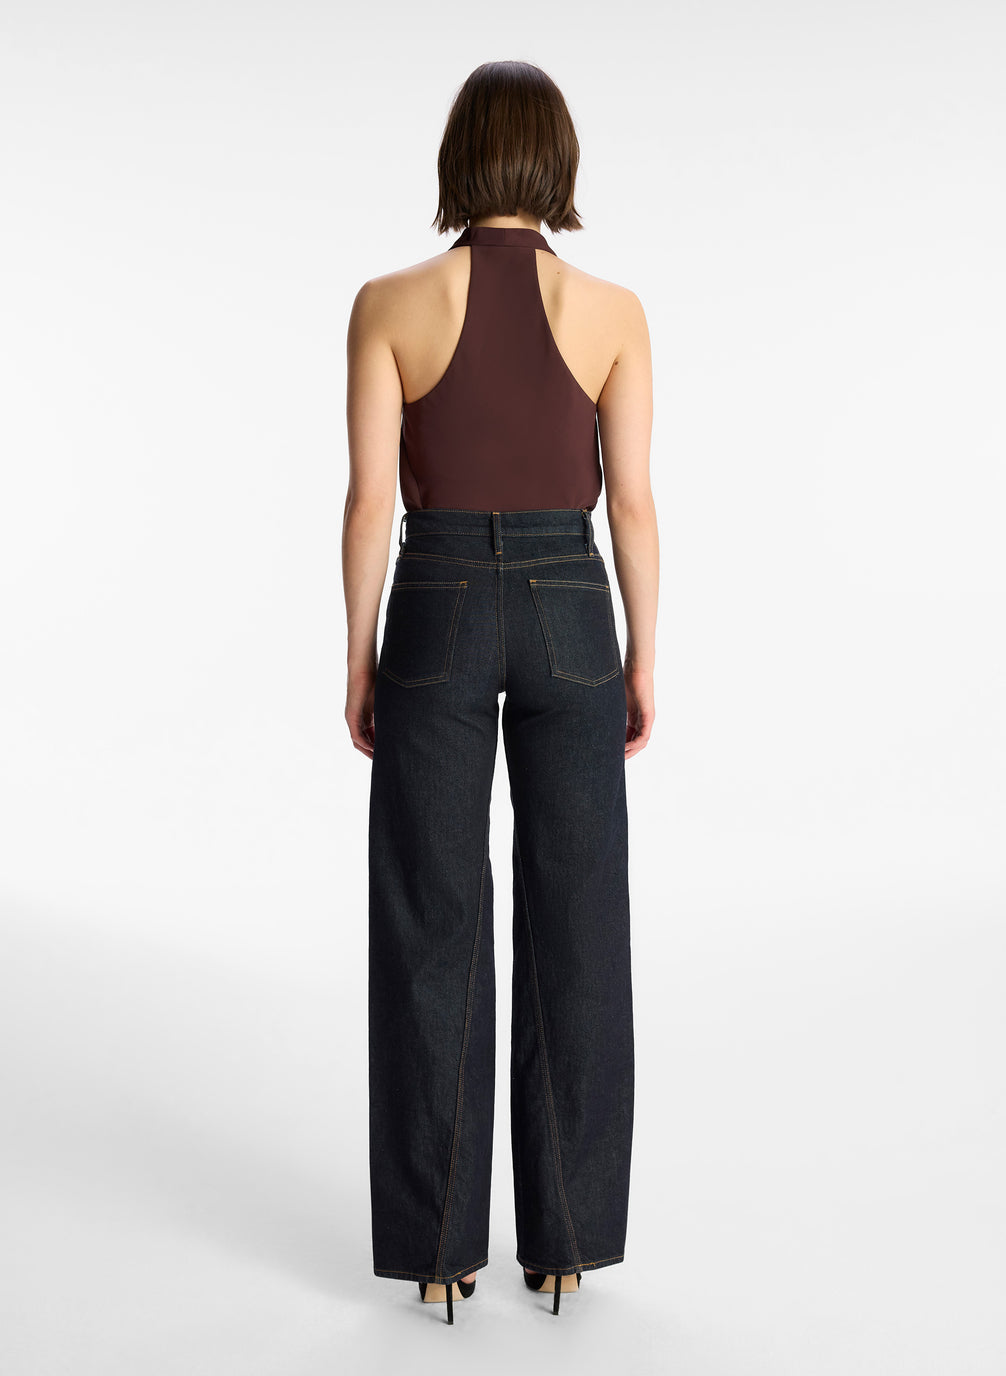 back view of woman wearing brown halter top and dark wash jeans